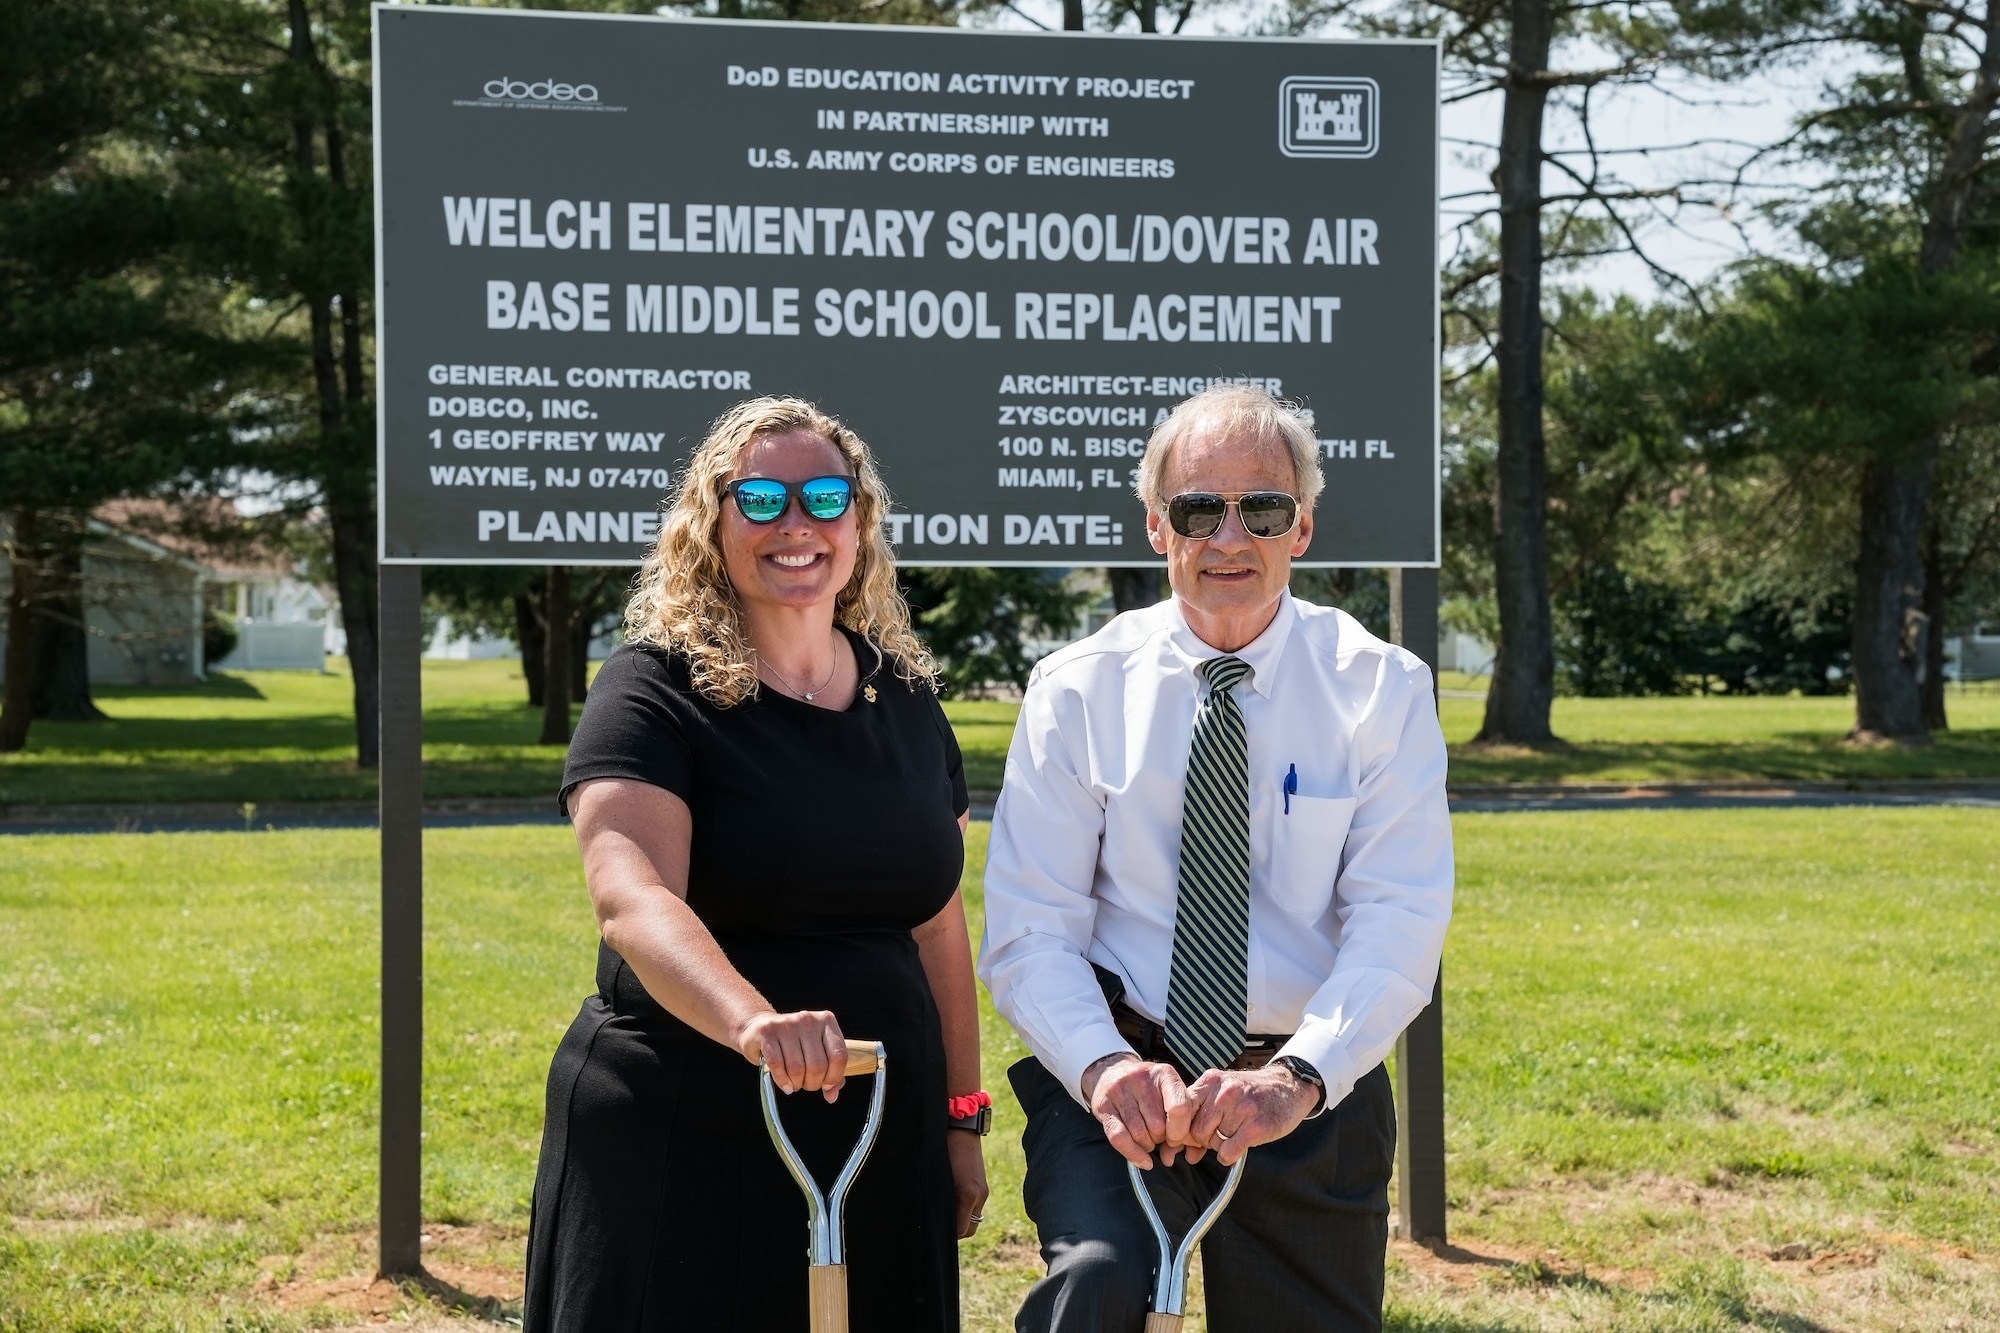 Sen. Tom Carper, D-Del., and Jessica Marelli, Caesar Rodney School District Board of Education president, Camden, Del., pose for a photo after the groundbreaking ceremony for the new Welch Elementary School/Dover Air Base Middle School June 3, 2019, in the family housing area at Dover Air Force Base, Del. The $48 million  project federally funded by the Department of Defense Education Activity will be built at the football field across the street form the Youth Center and adjacent to the existing elementary and middle schools. Scheduled to open at the beginning of the 2021 school year, the new building will have more than 105,000 square feet in learning space for approximately 490 students. (U.S. Air Force photo by Roland Balik)